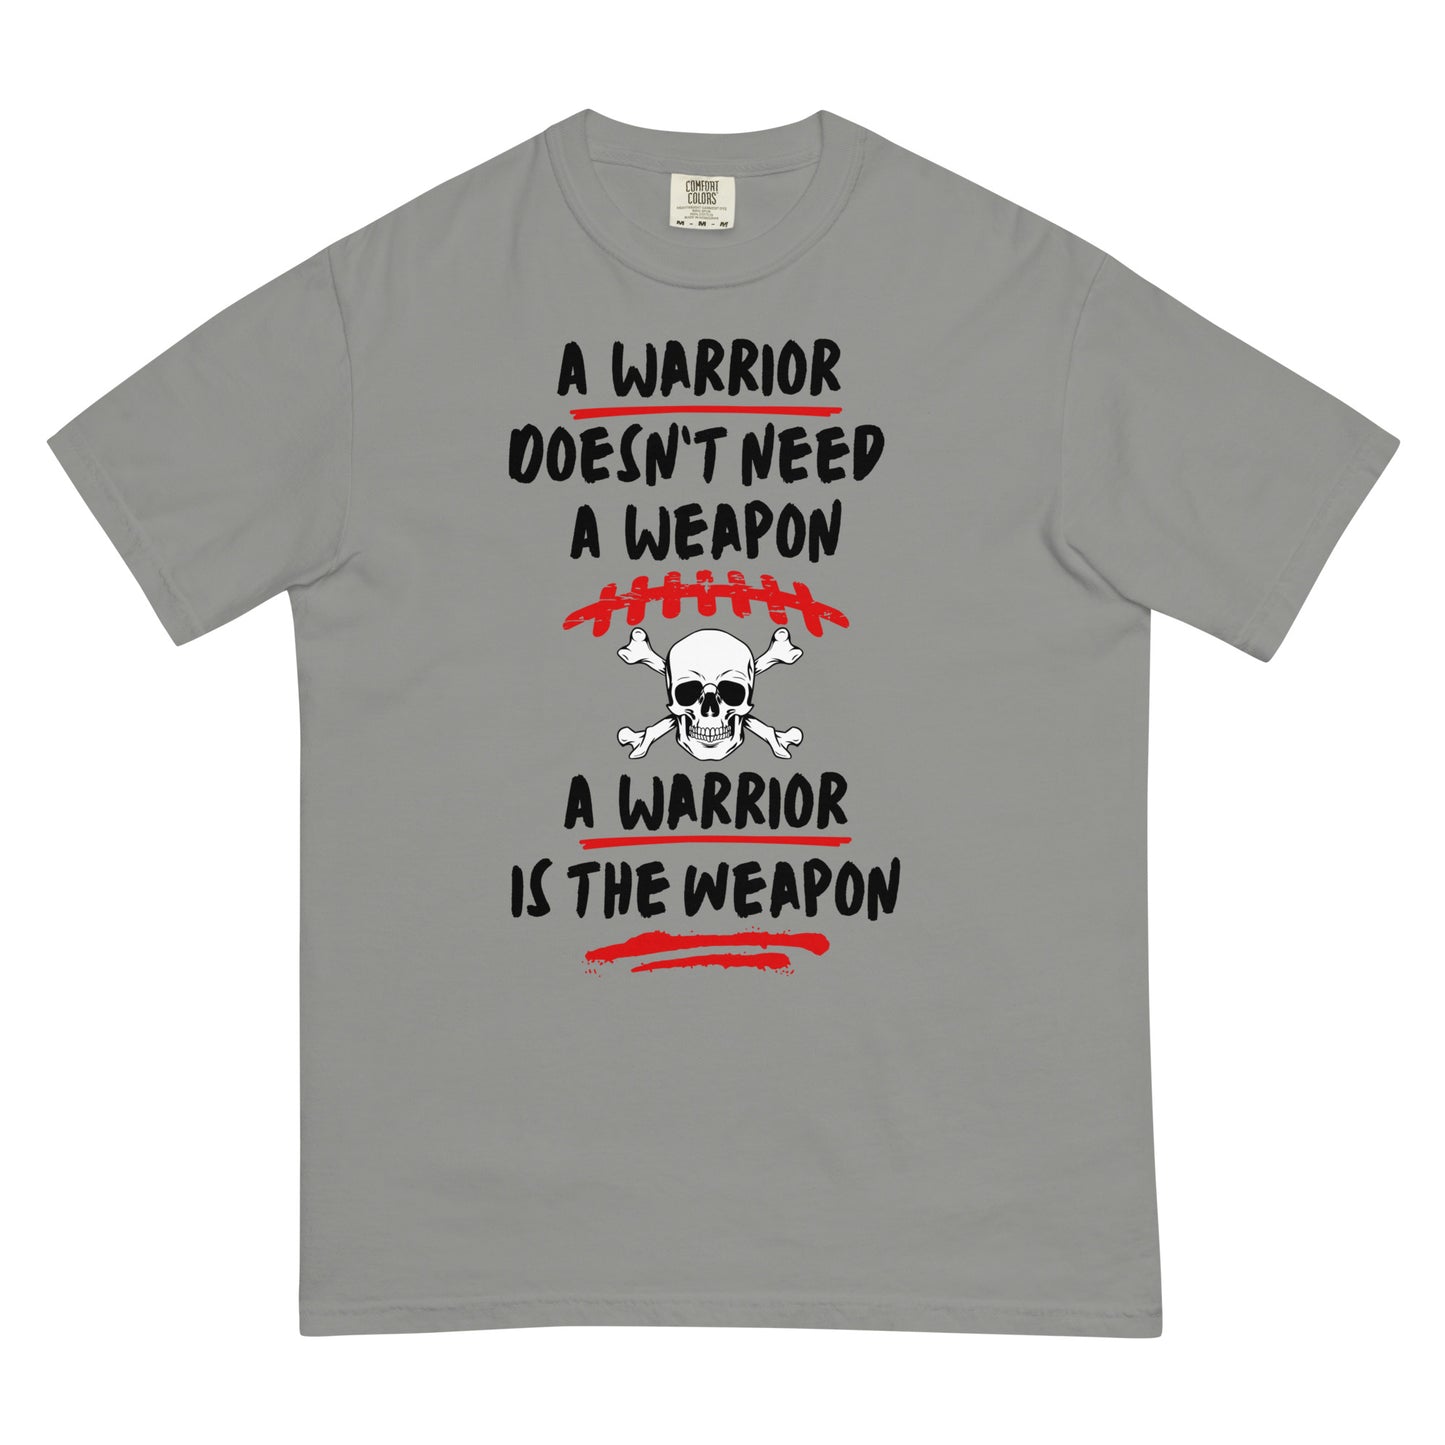 A Warrior IS THE Weapon T-shirt